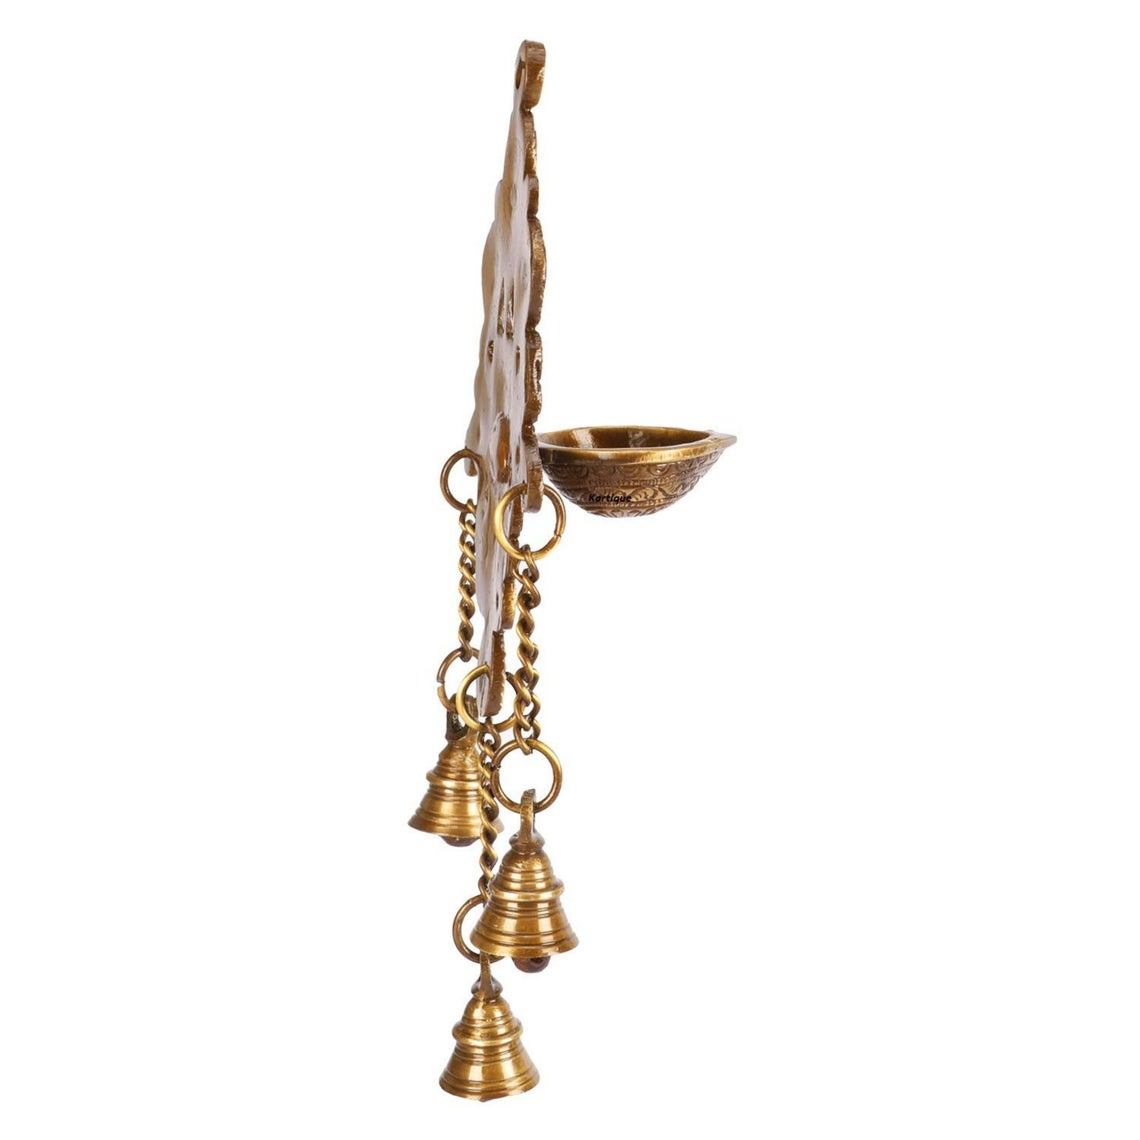 Buy Brass Oil Lamp for Wall Art, Antique Brass Decorative Hanging Oil Lamp